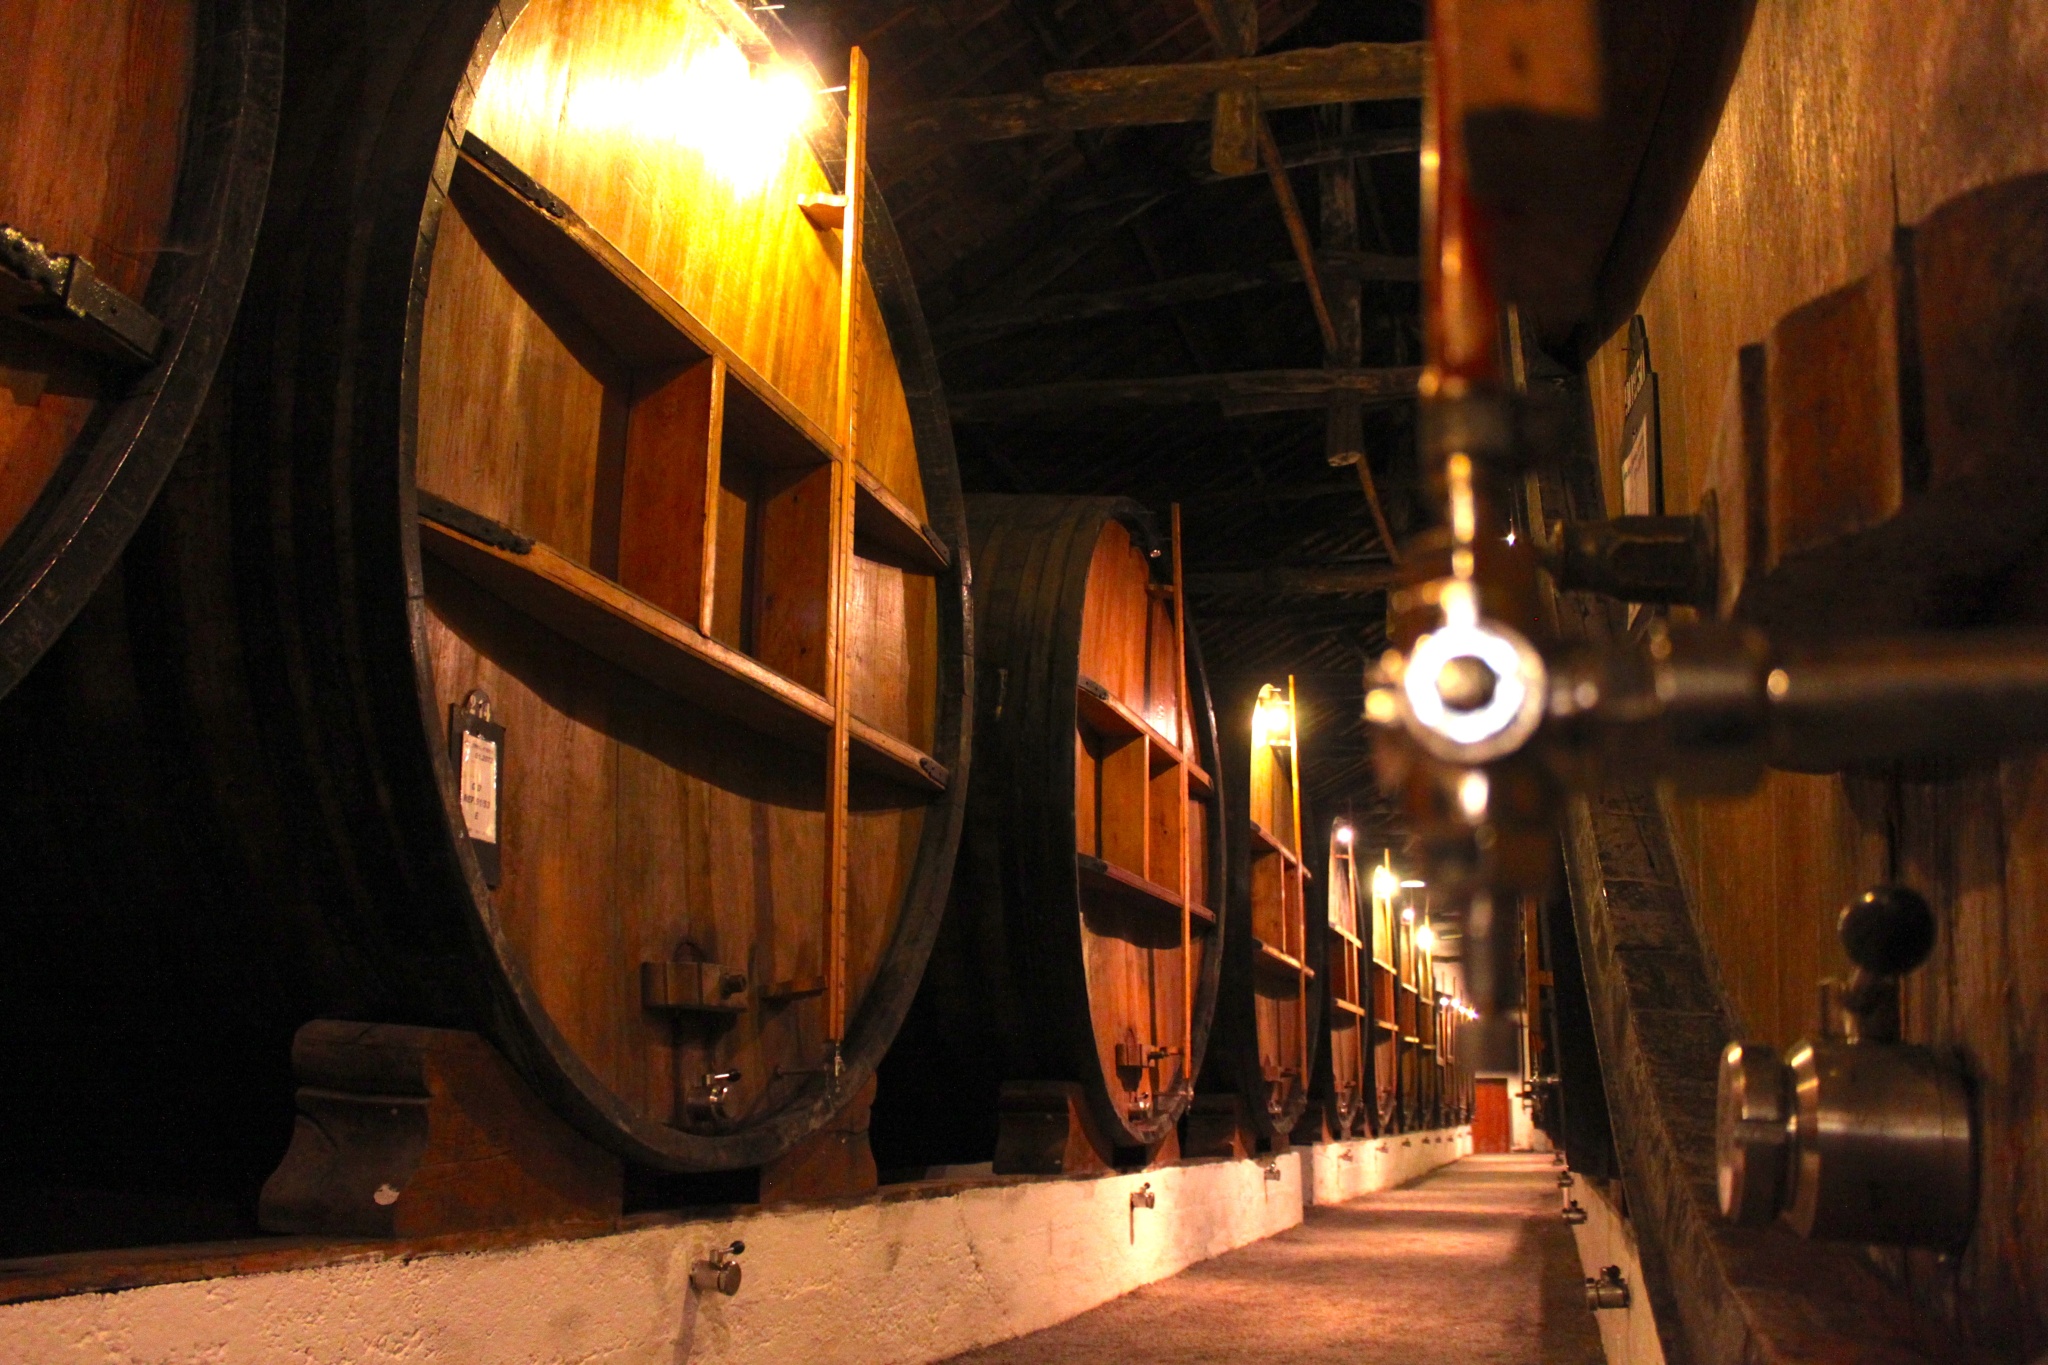 Wine ages in wooden barrels at Taylorâ€™s Port Wine in Porto, Portugal.